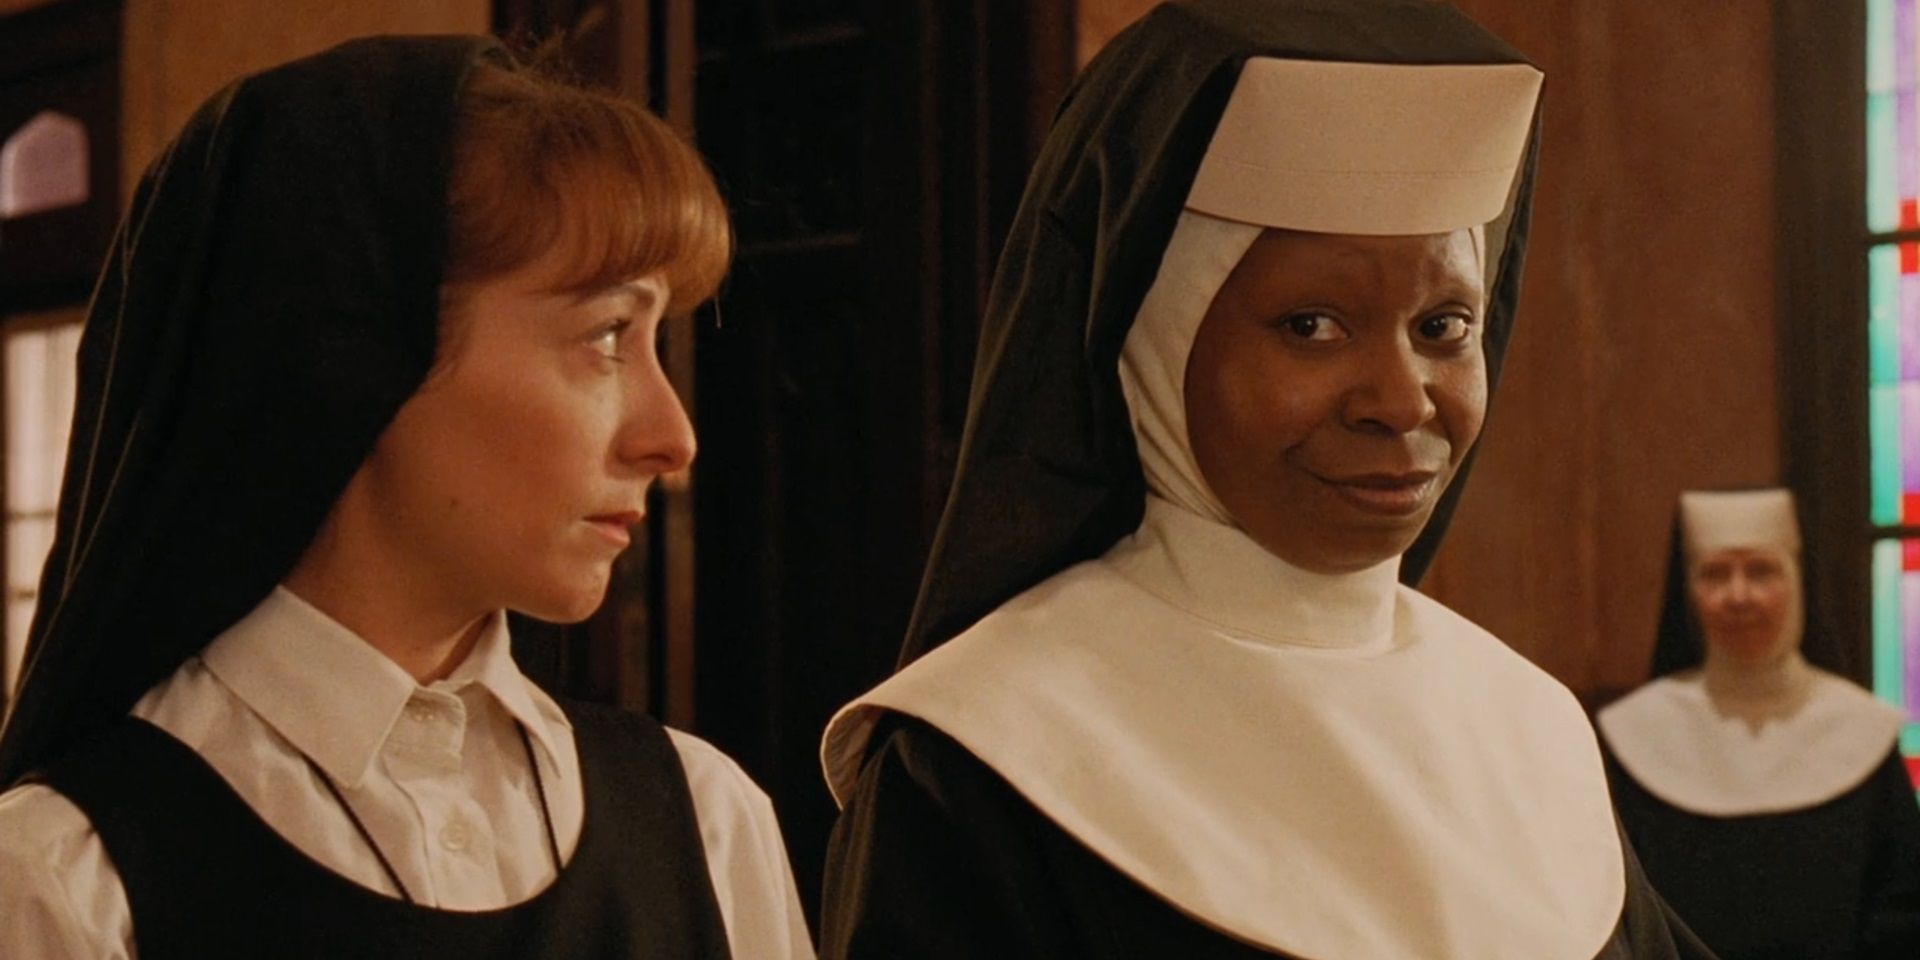 Whoopi Goldberg smiling in Sister Act